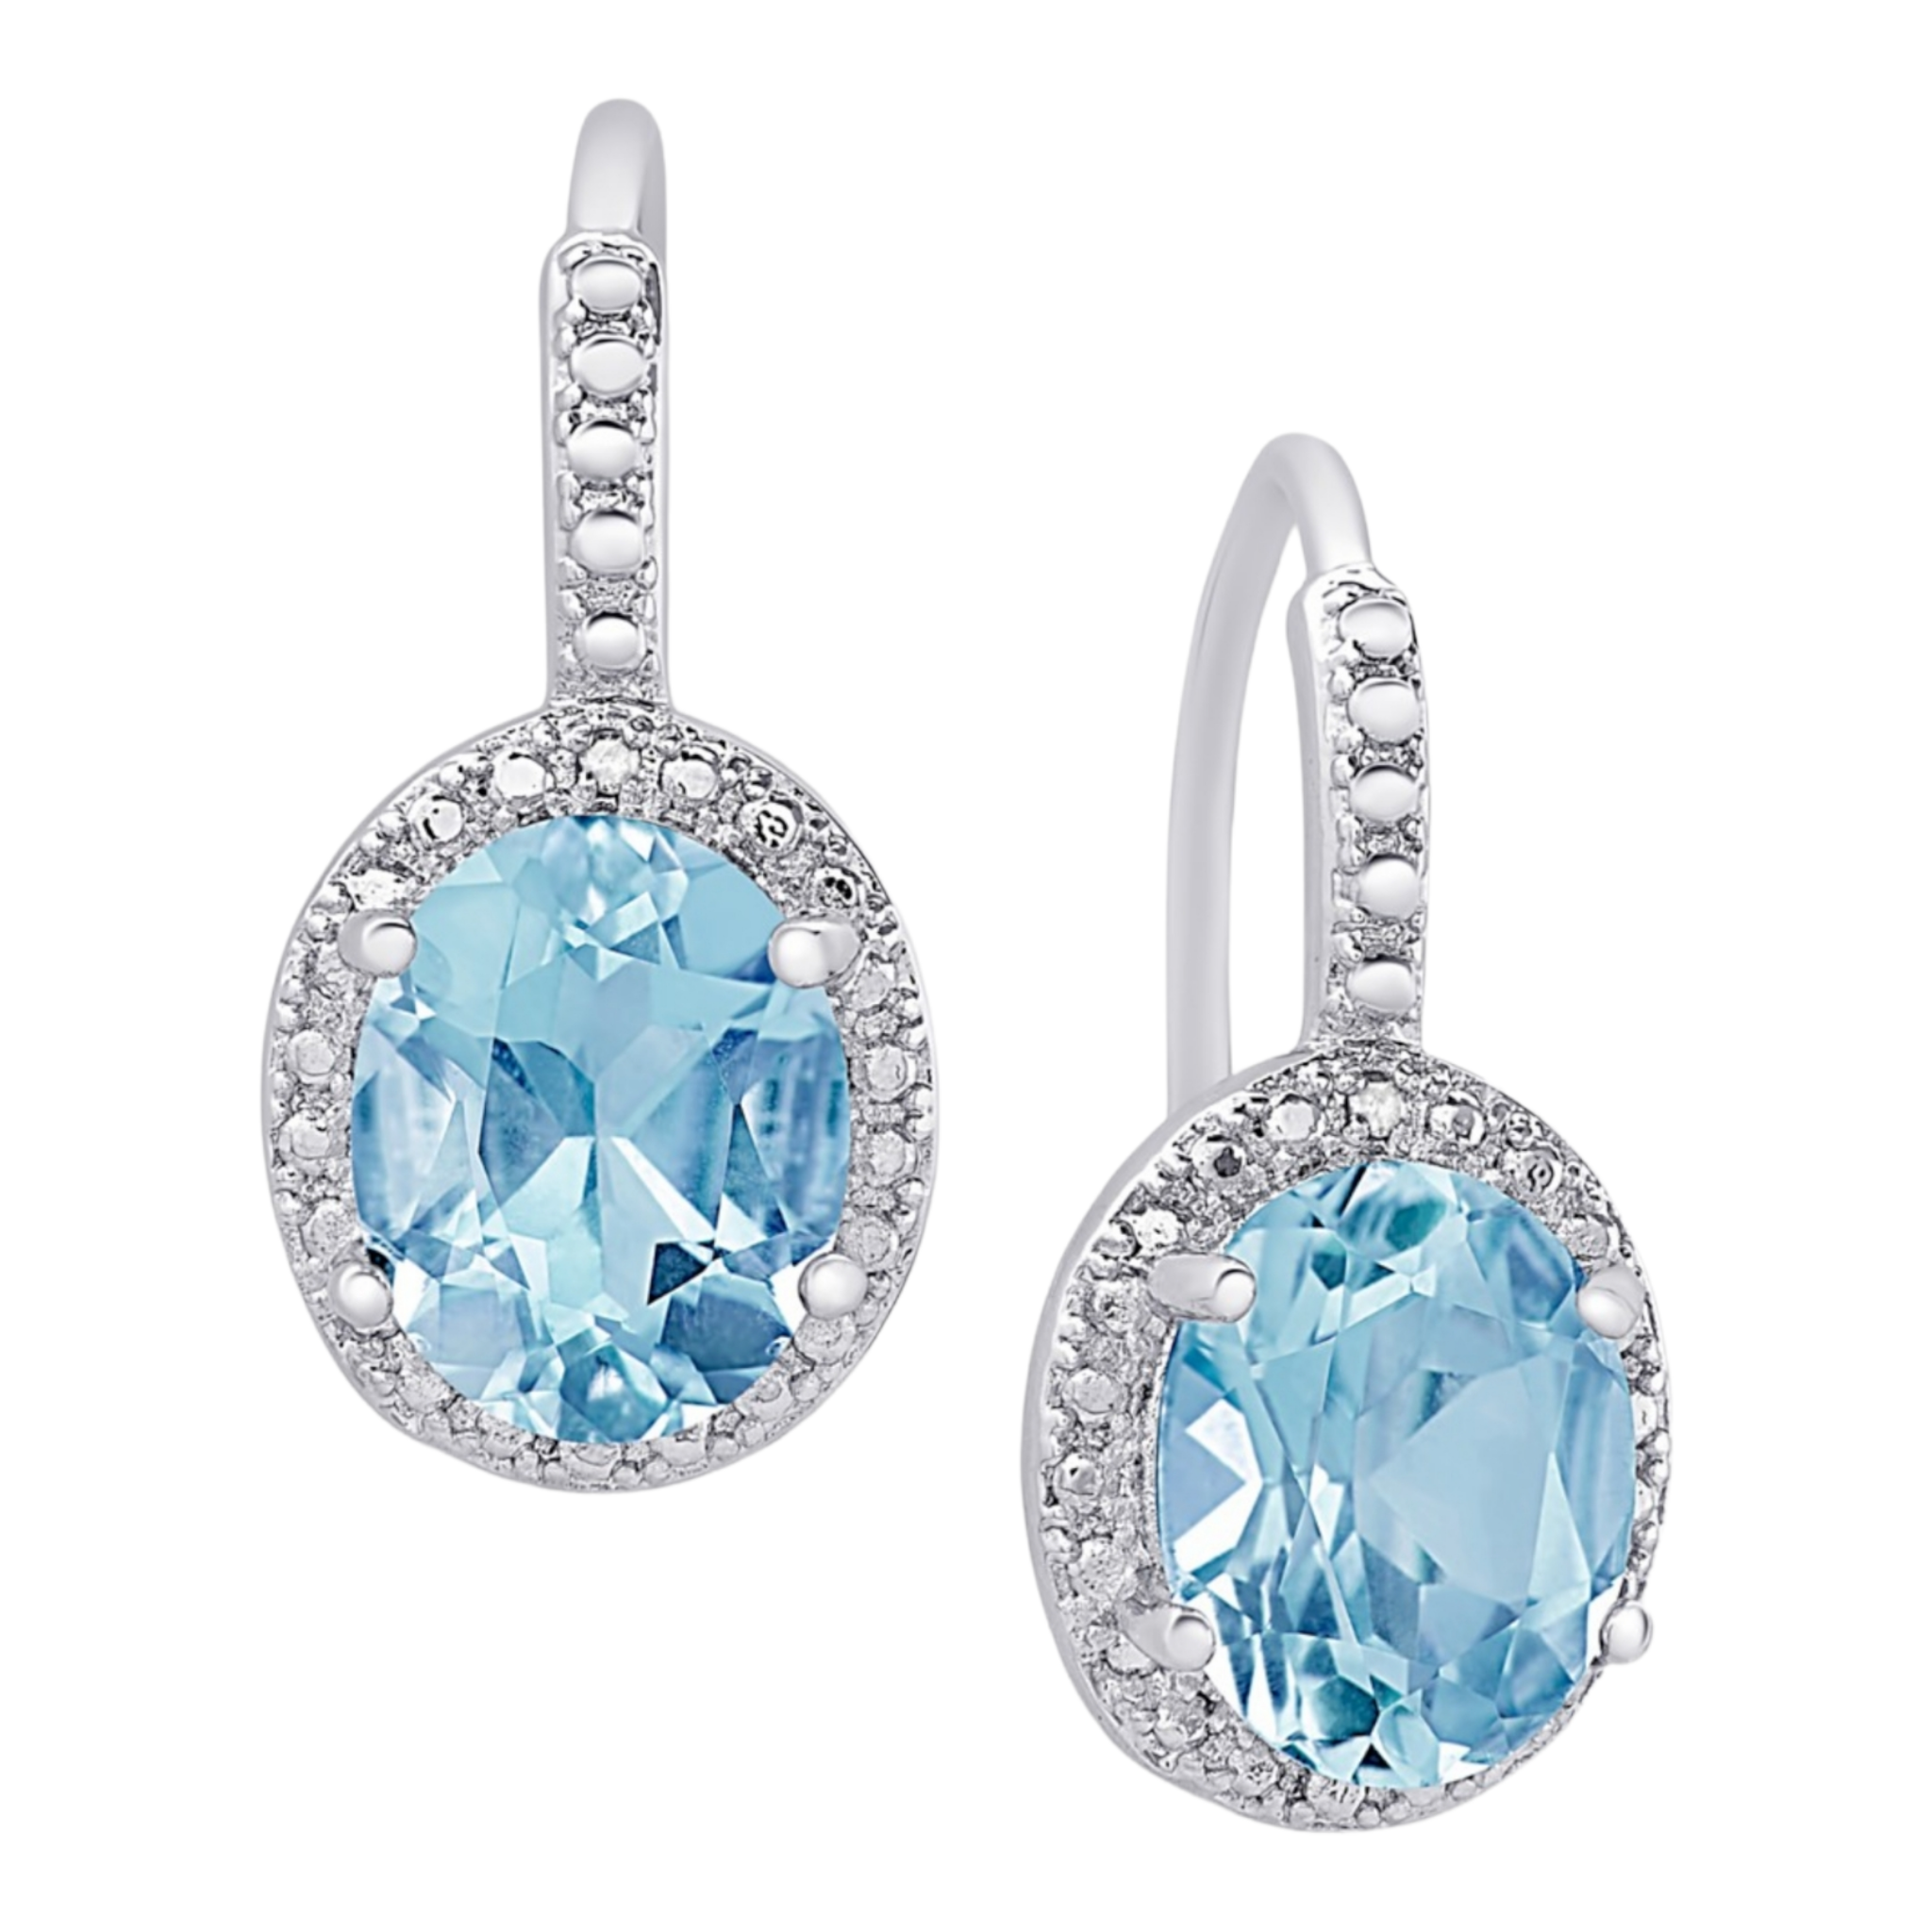 Blue Topaz (6-3/8 ct. t.w.) and Diamond Accent Drop Earrings in Sterling Silver